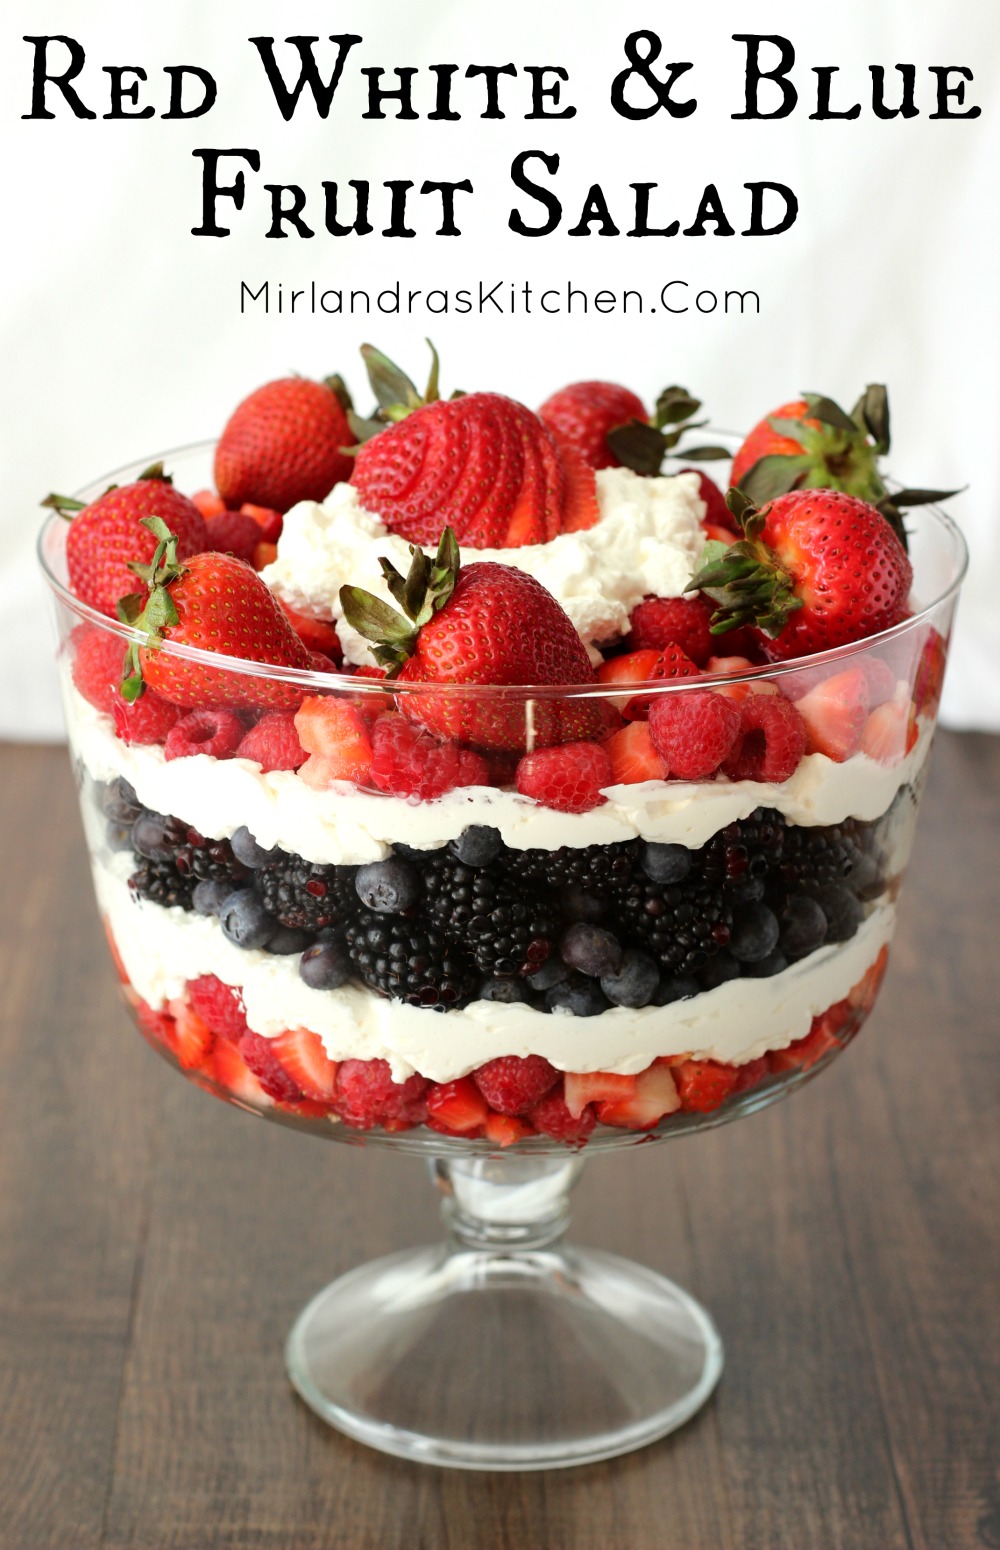 Red White and Blue Fruit Salad - Mirlandra's Kitchen